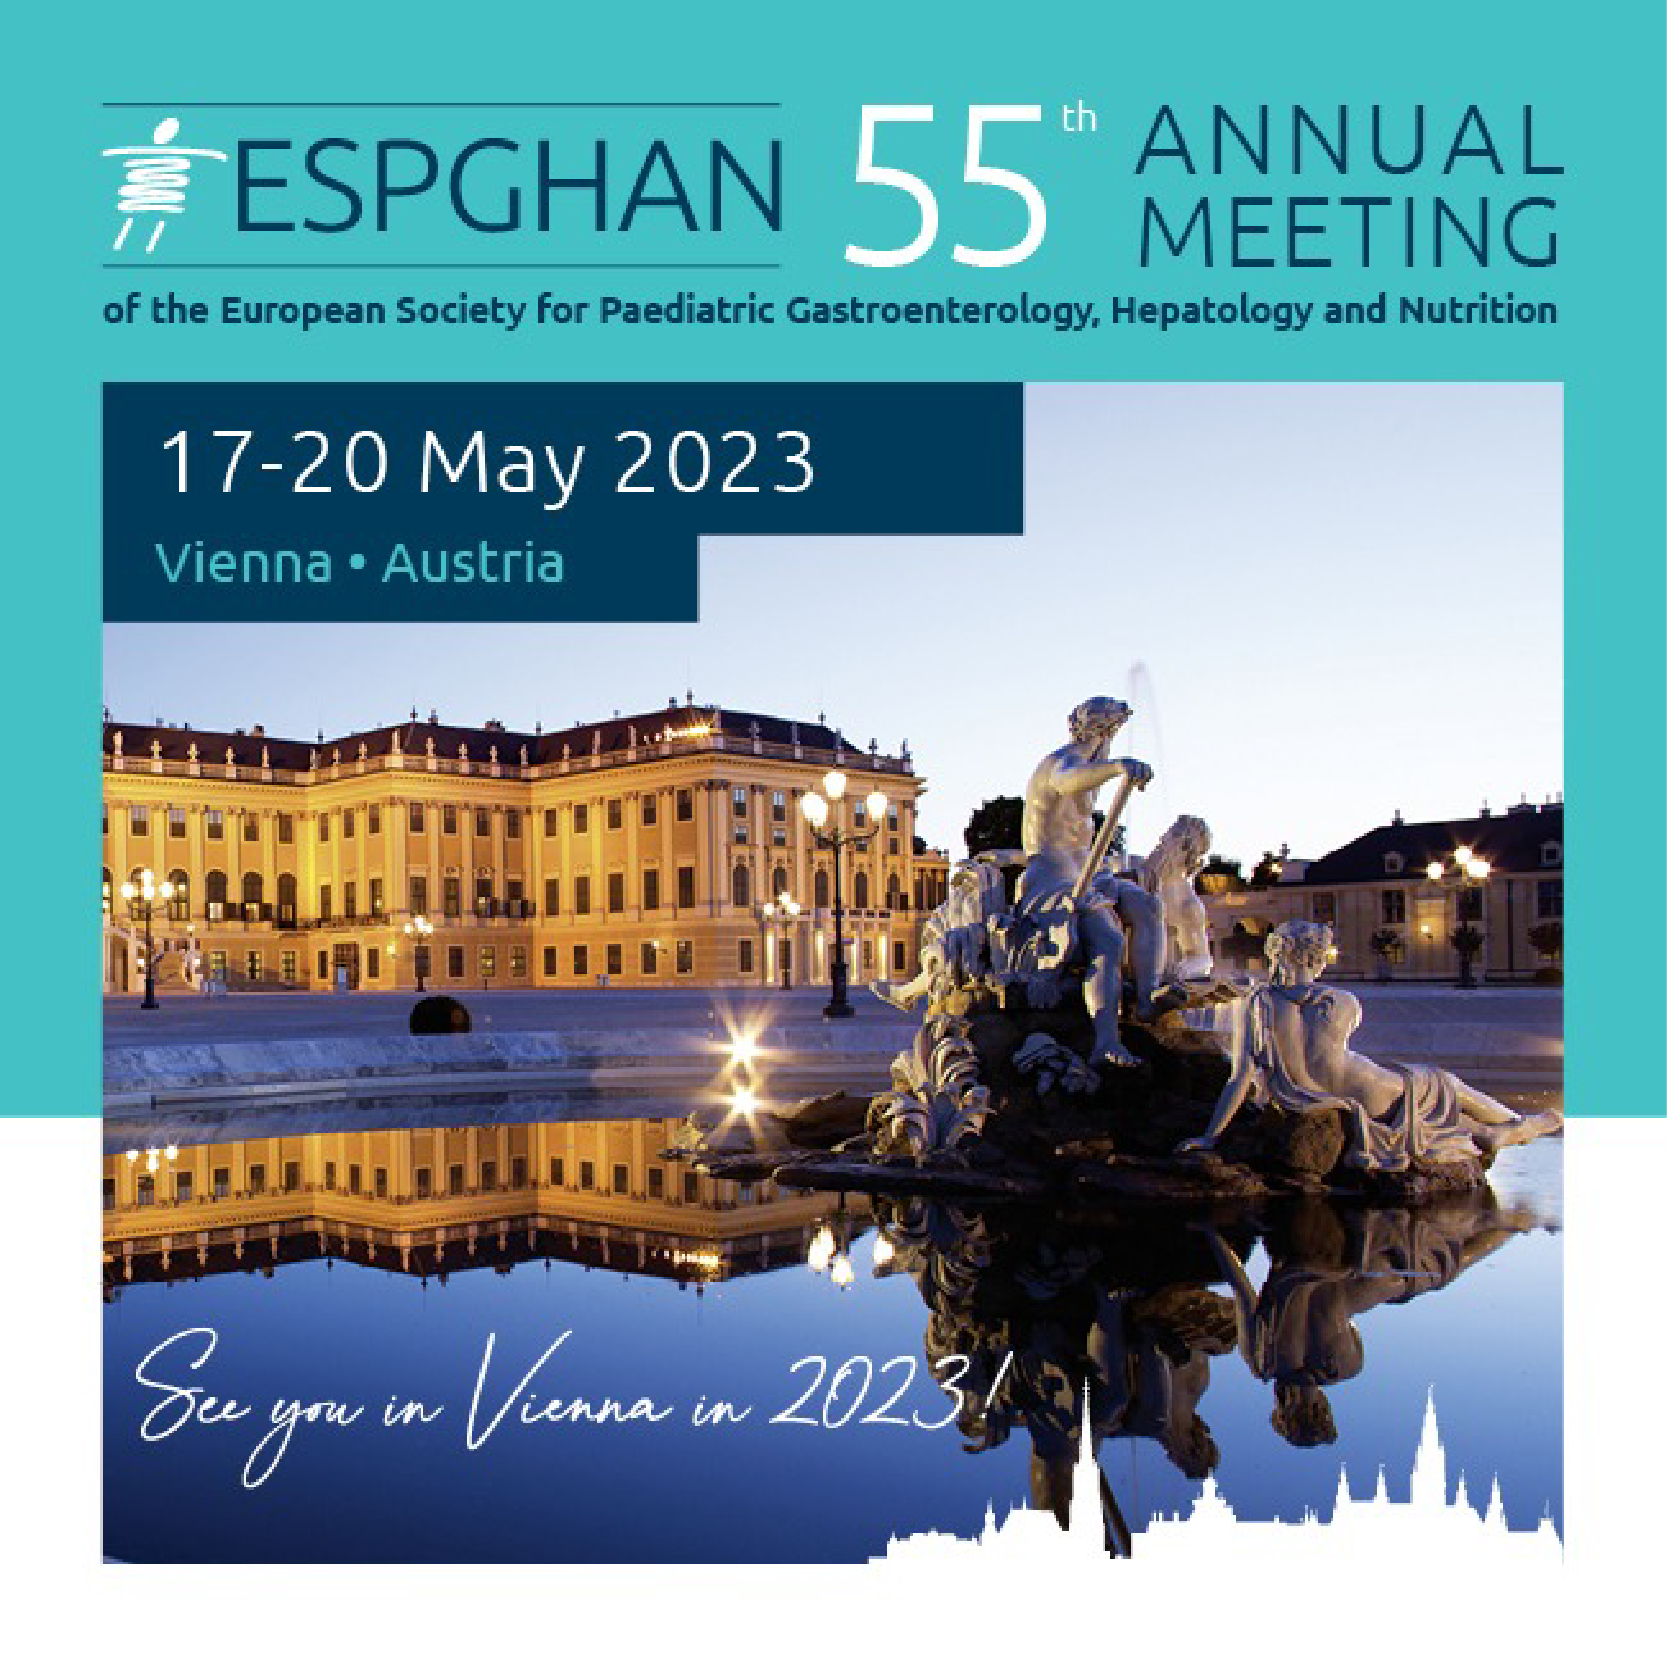 55th Annual Meeting of The European Society for Paediatric Gastroenterology Hepatology and Nutrition - ESPGHAN 2023